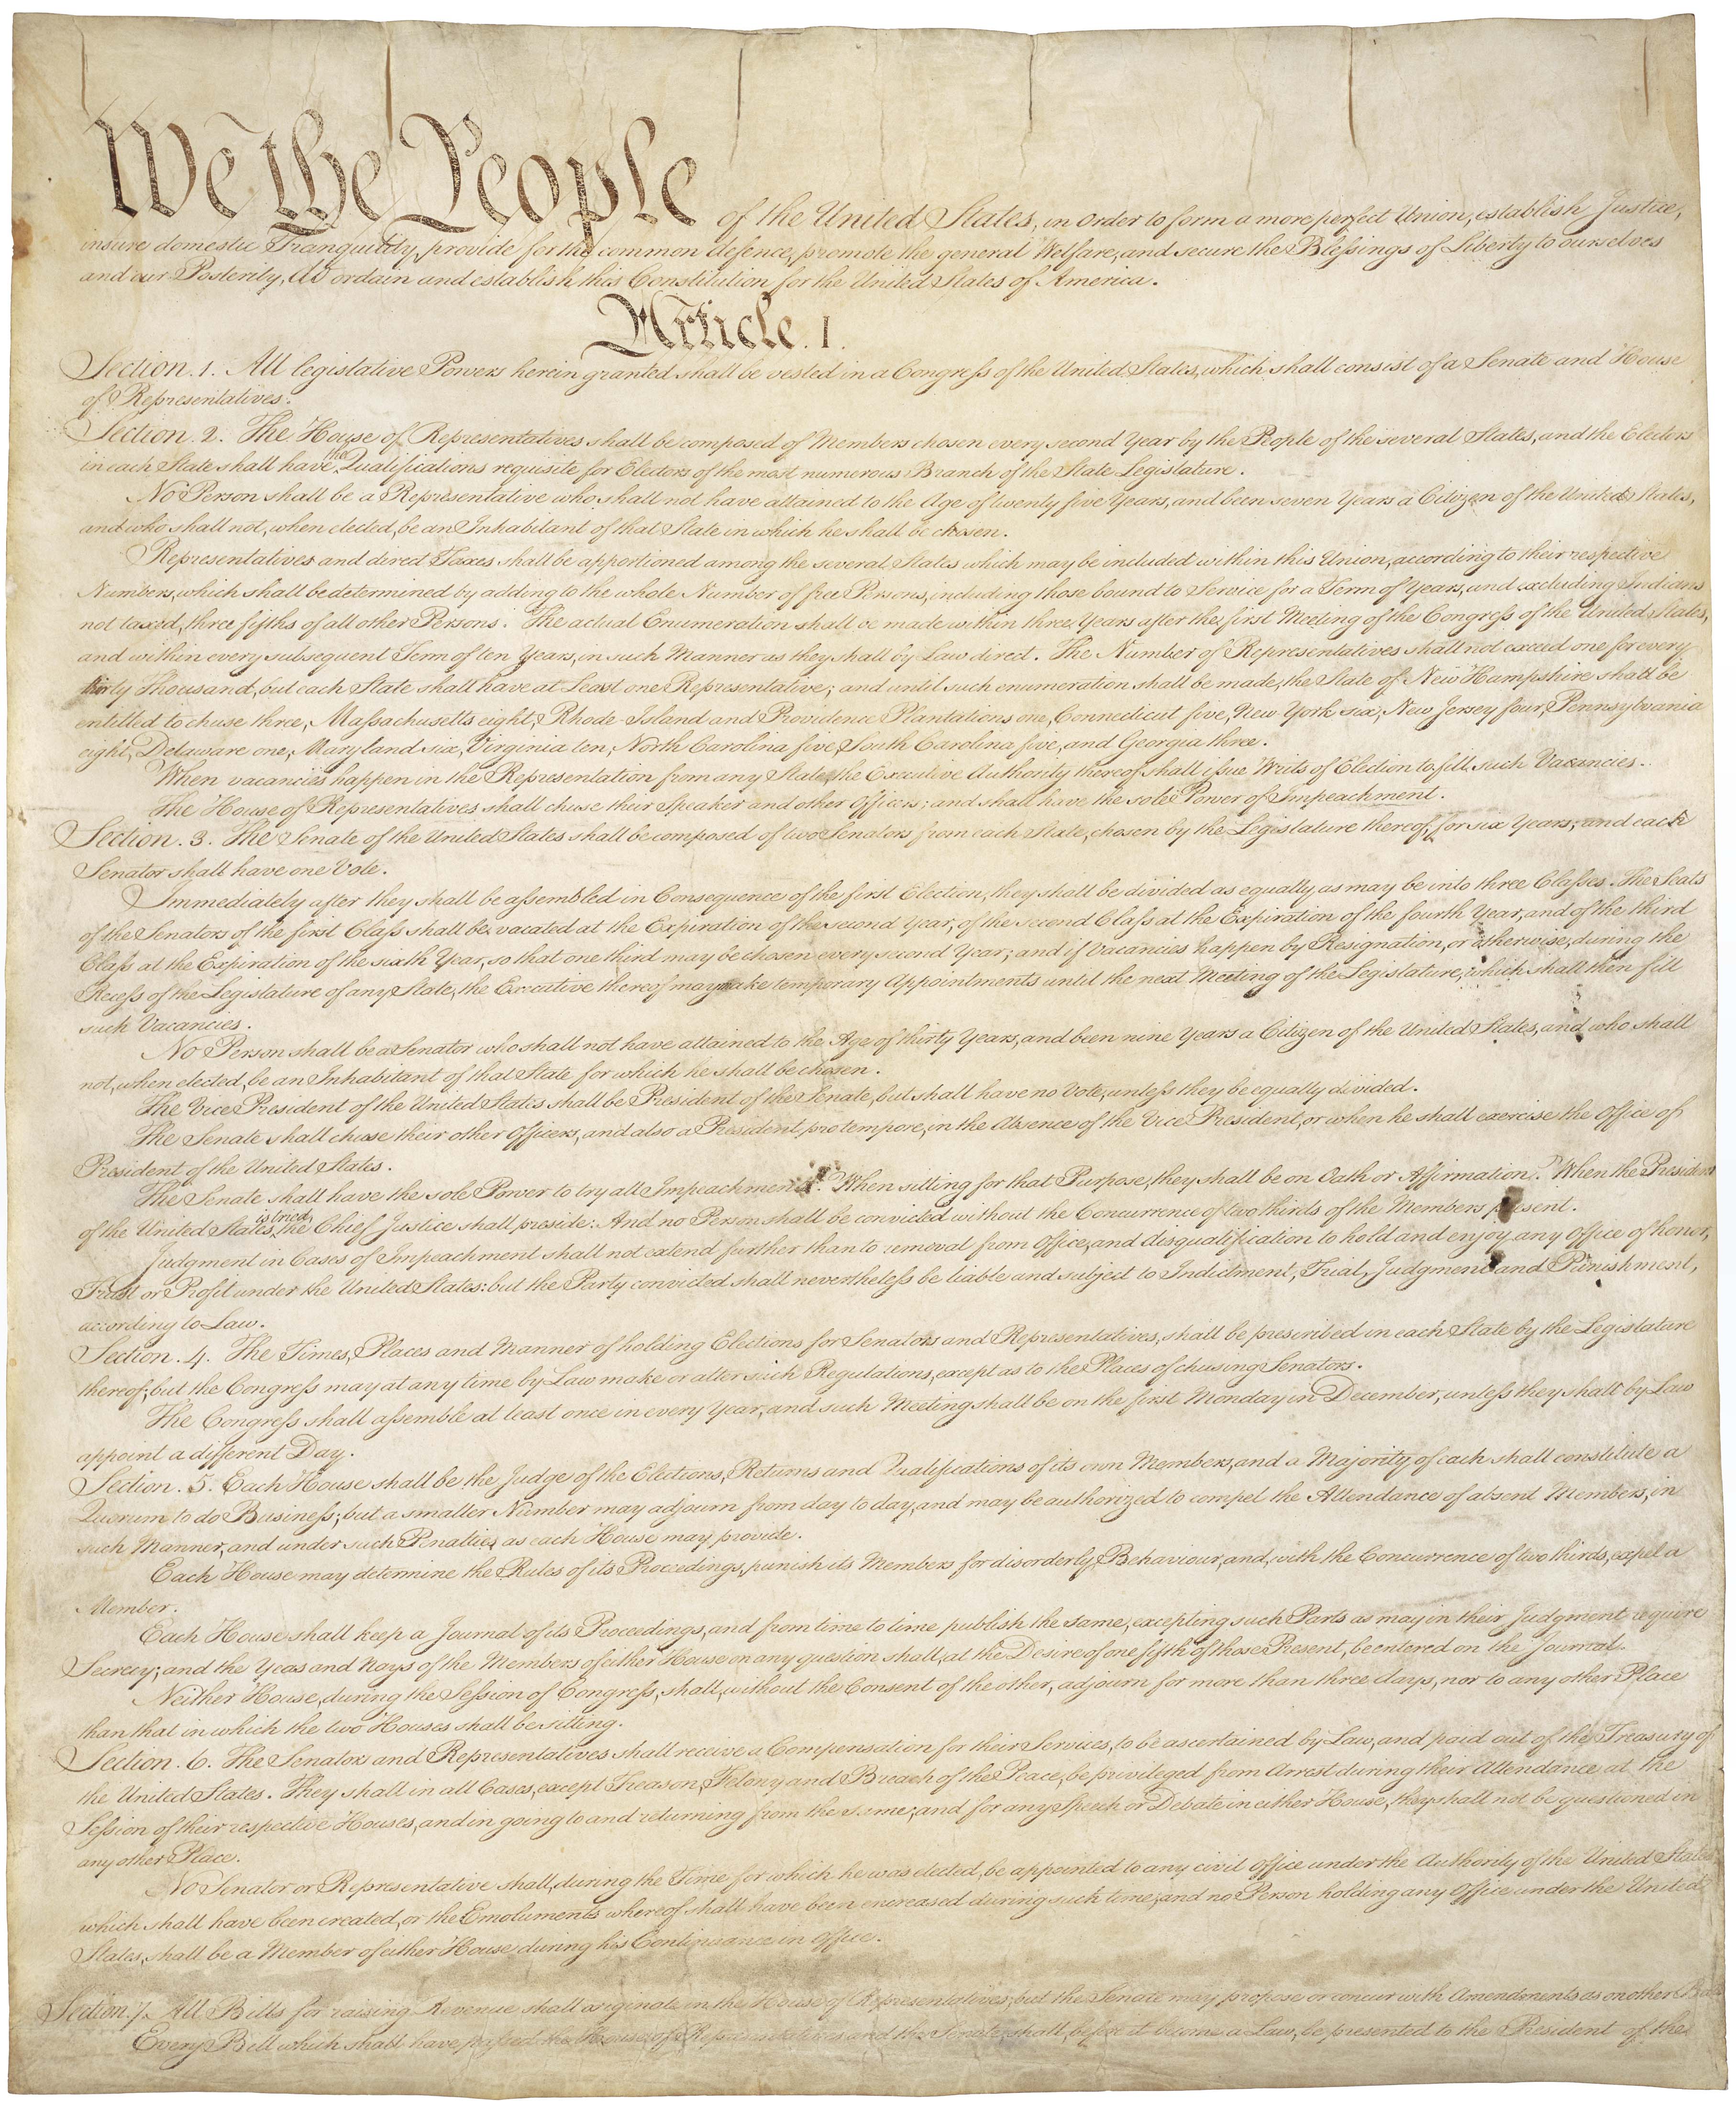 what is the importance of the preamble to the constitution